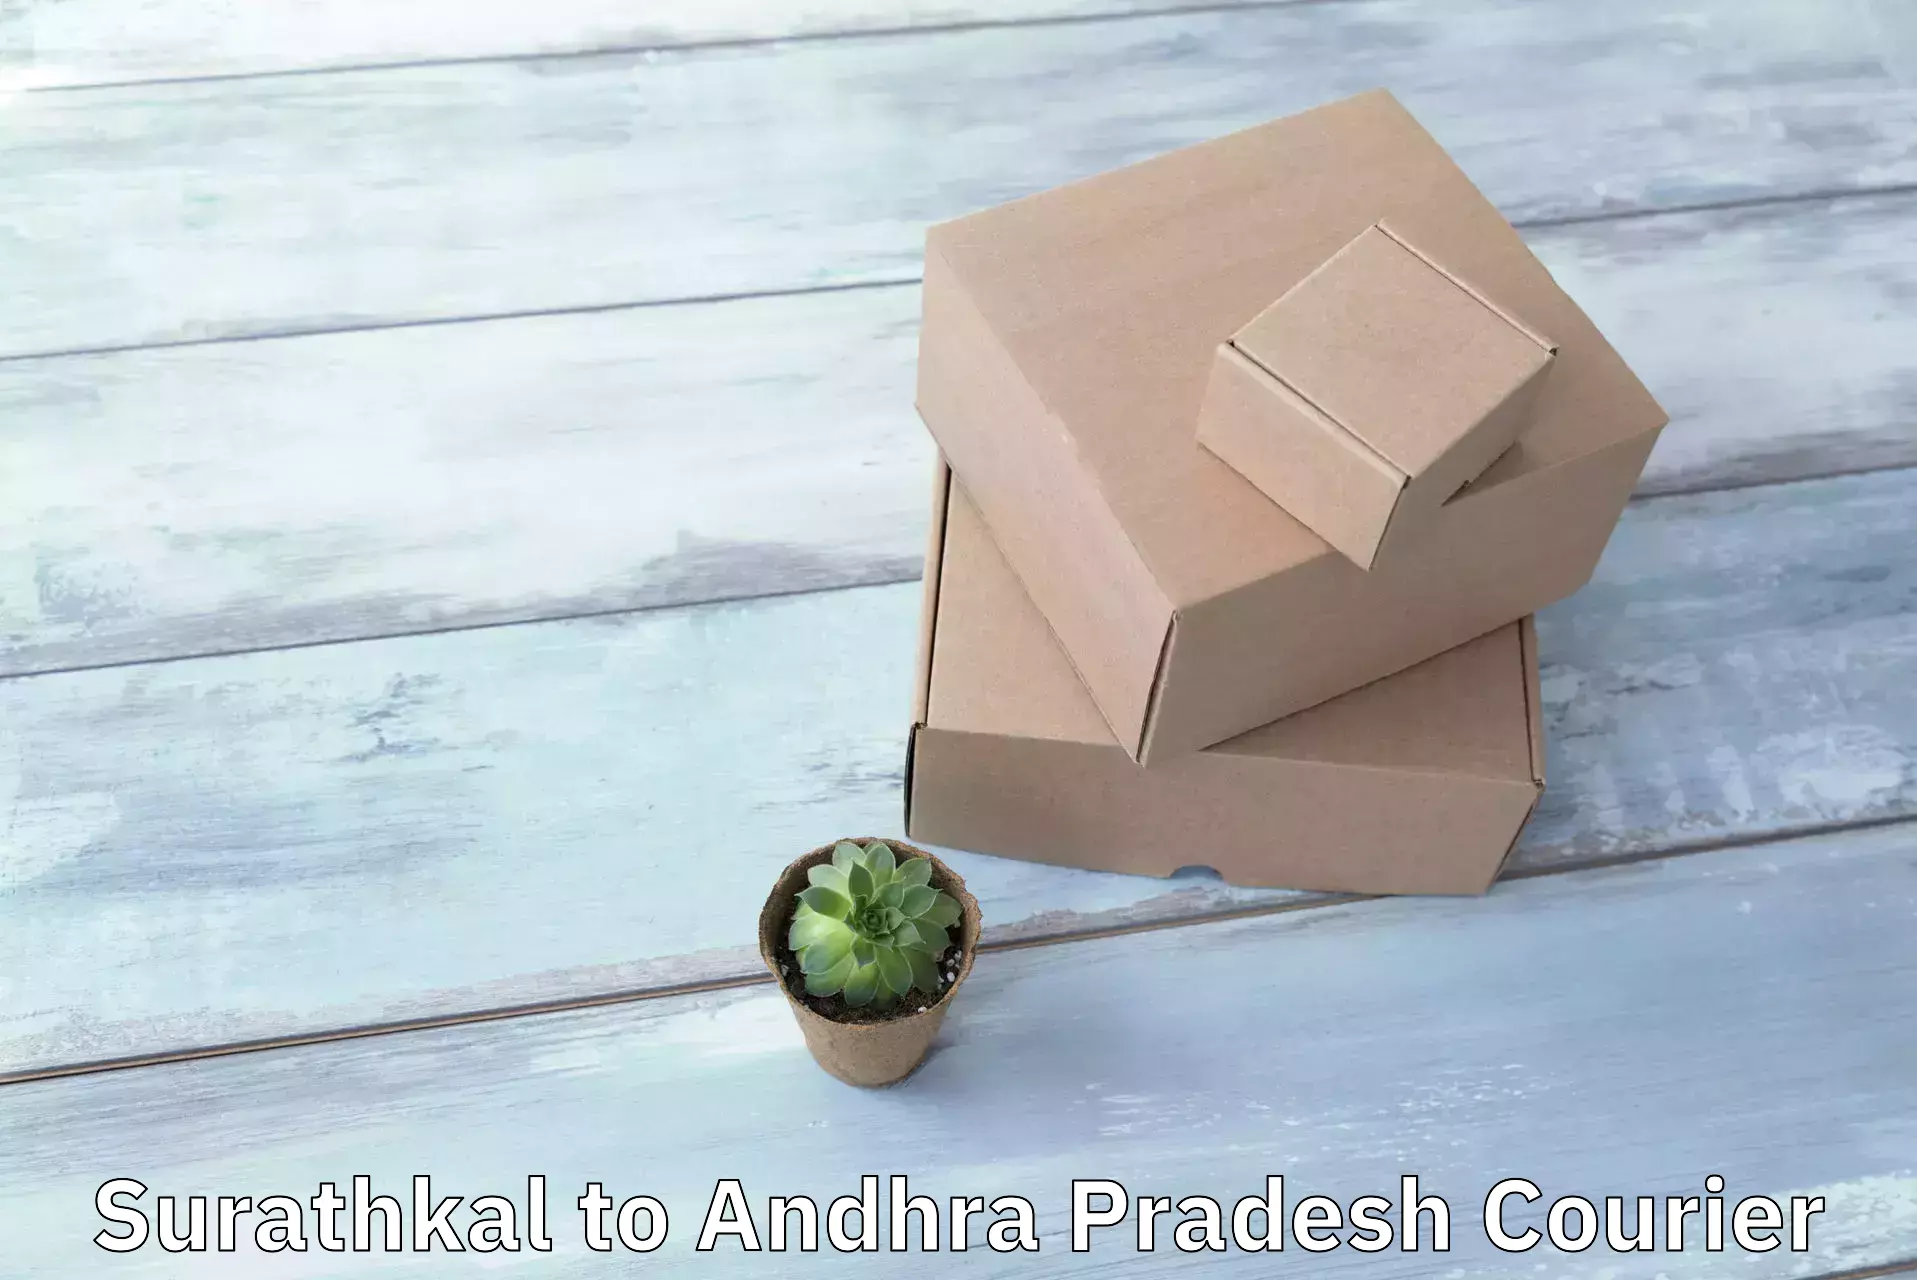 Fast parcel dispatch in Surathkal to Andhra Pradesh